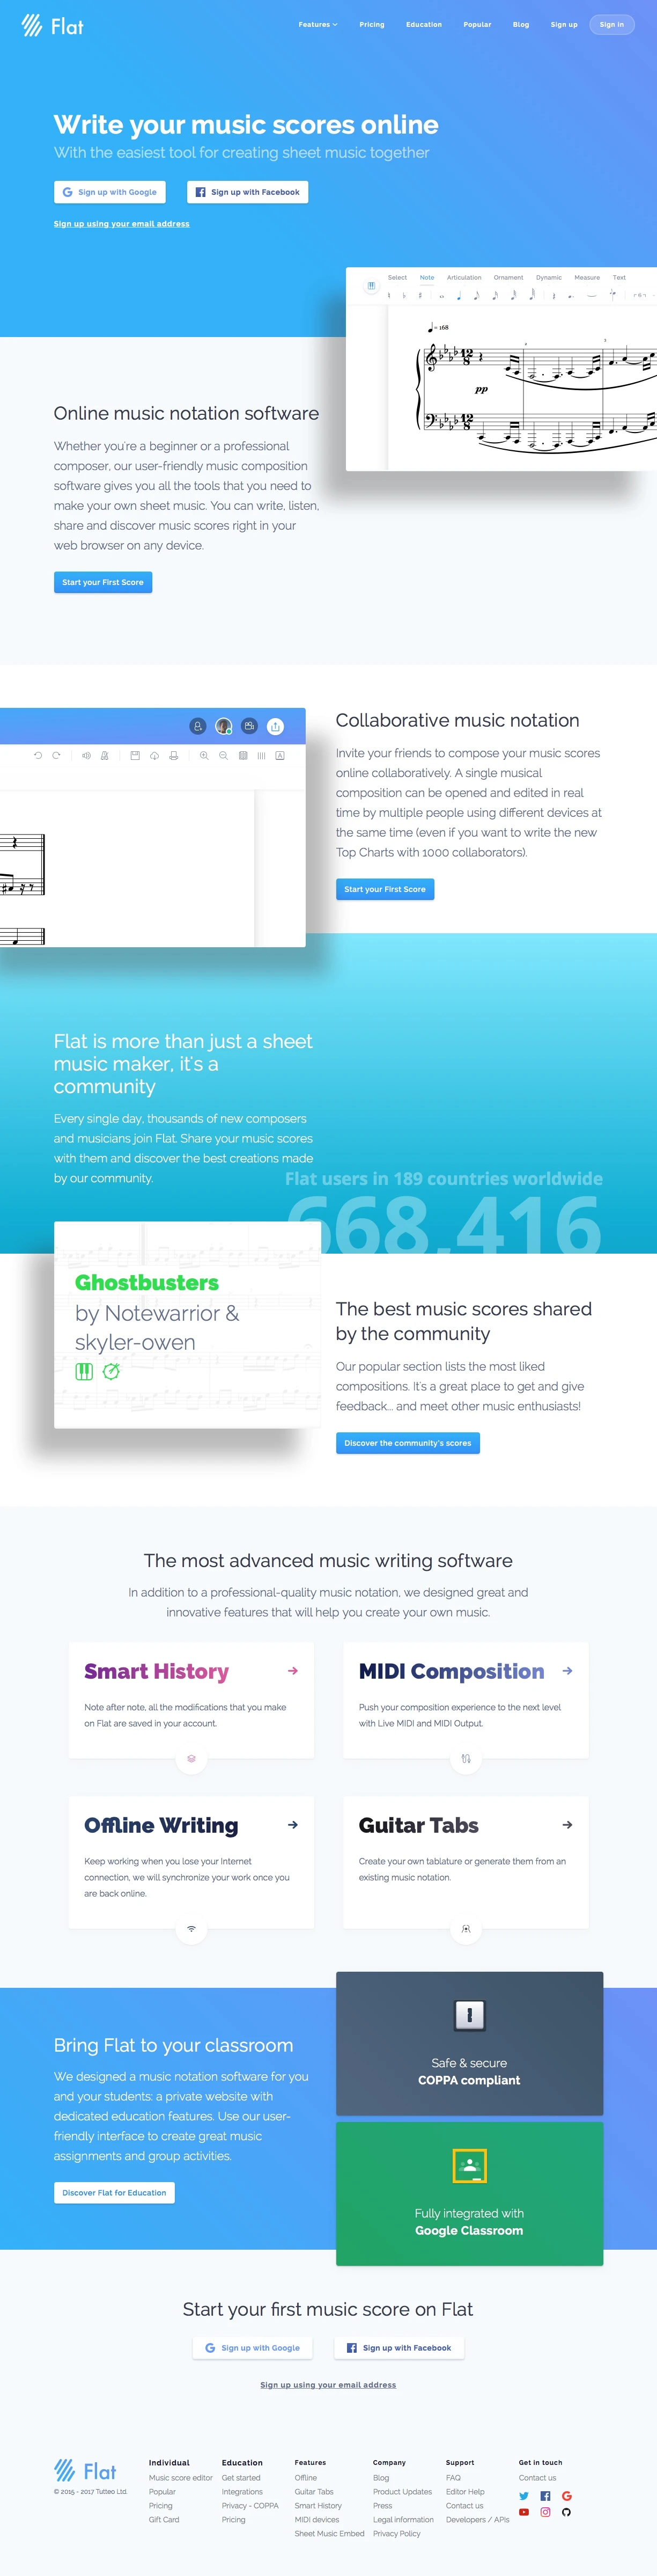 Flat Landing Page Example: Online collaborative music notation software